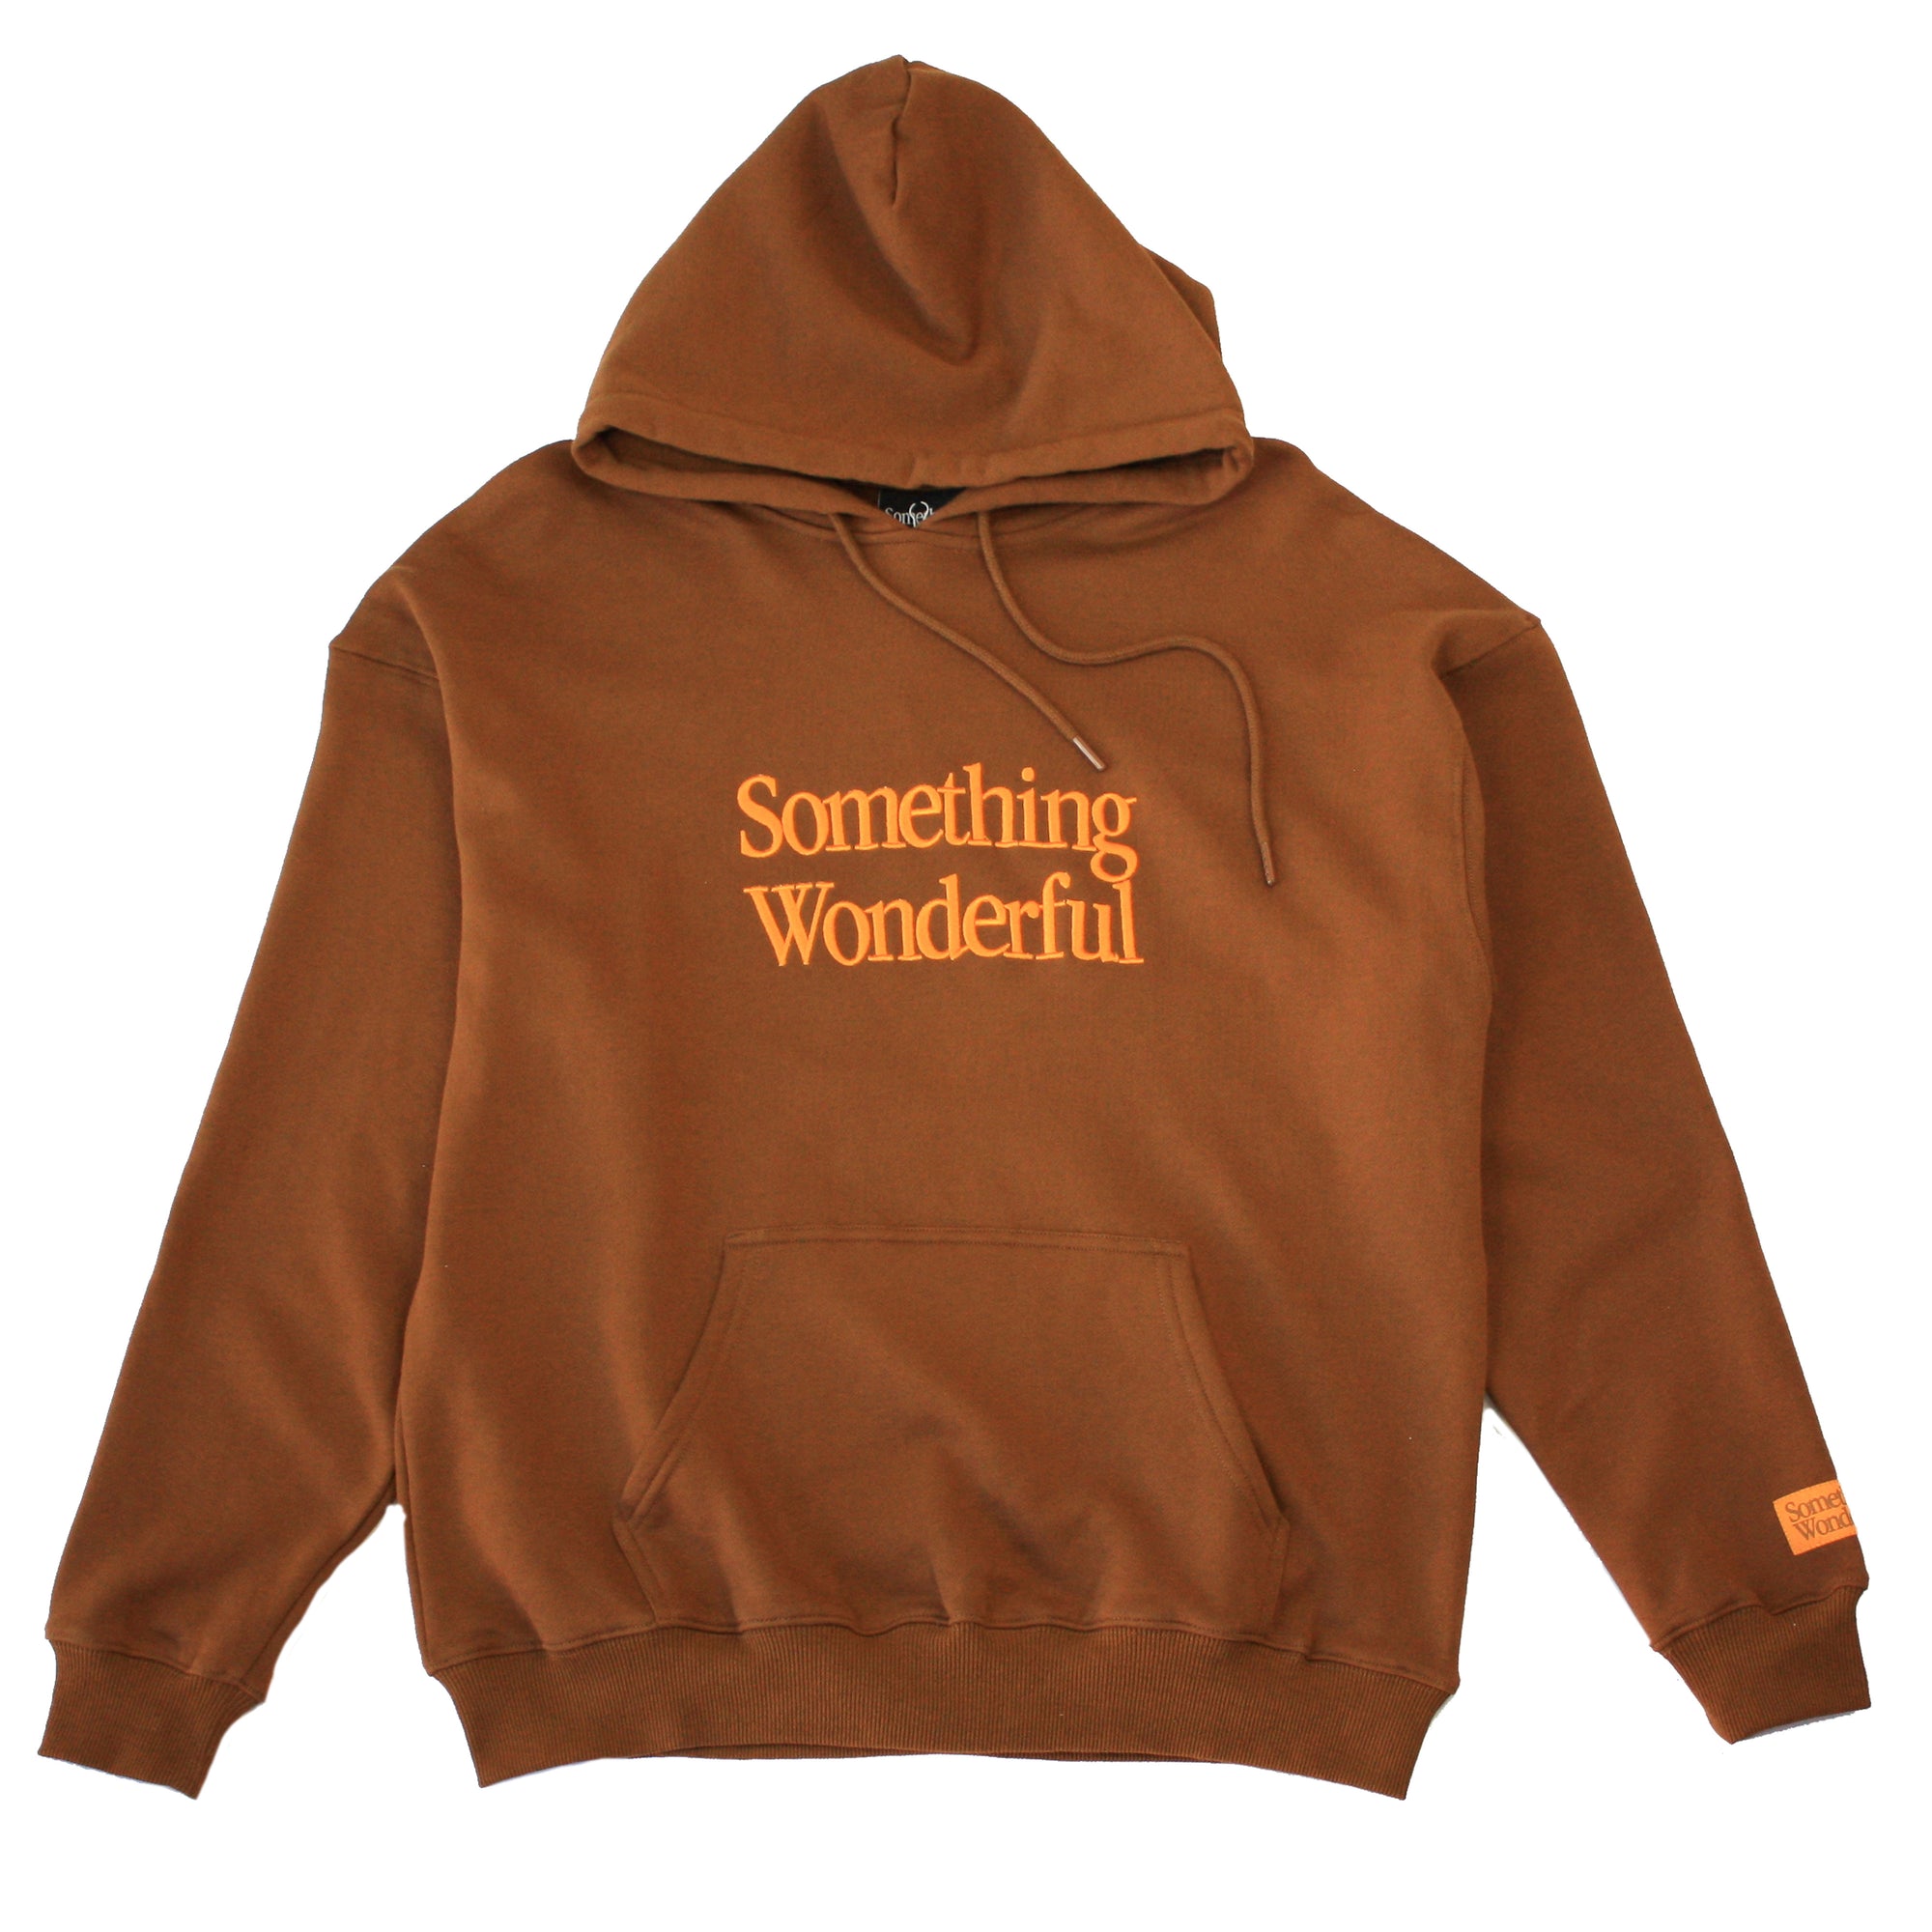 Brown hoody with embroidered gold logo